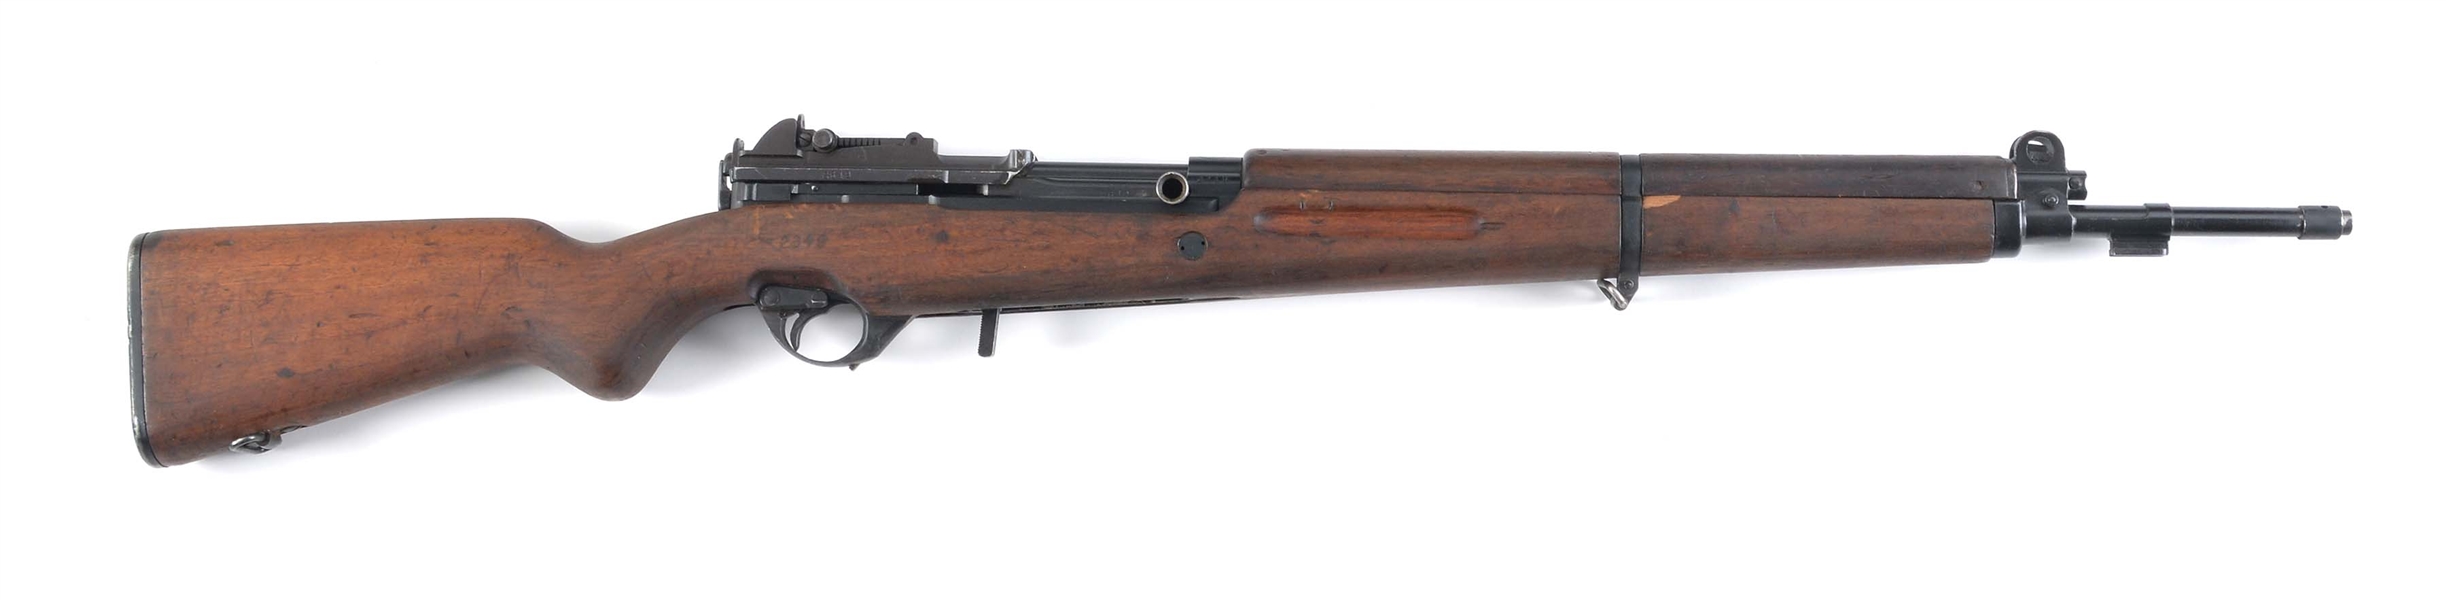 (C) FABRIQUE NATIONALE ARGENTINE NAVY CONTRACT FN-49 SEMI AUTOMATIC RIFLE.